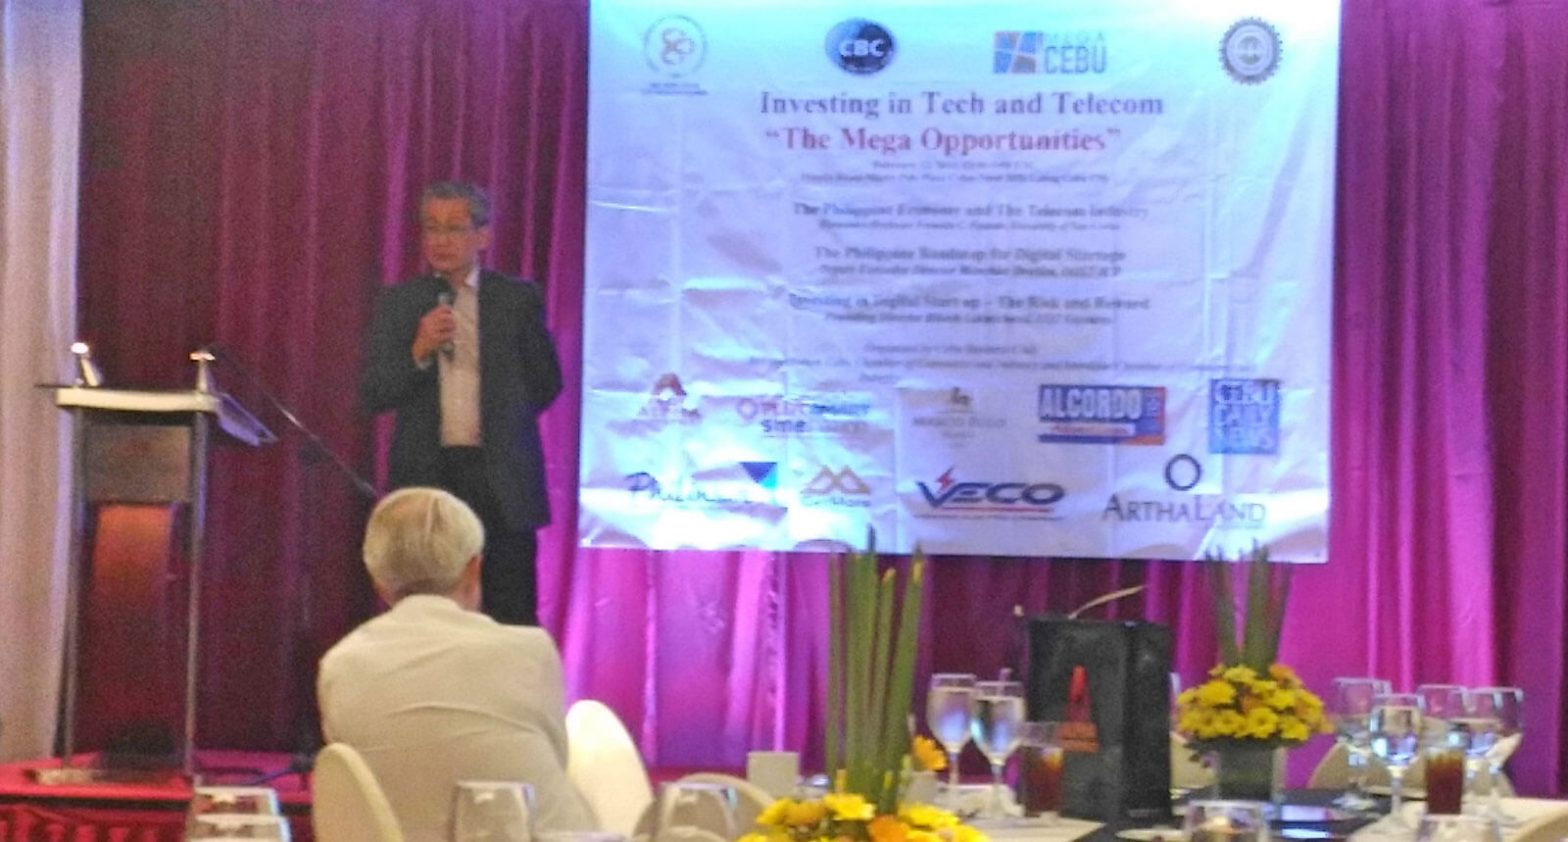 Filipino startups face unique opportunities, challenges: DOST